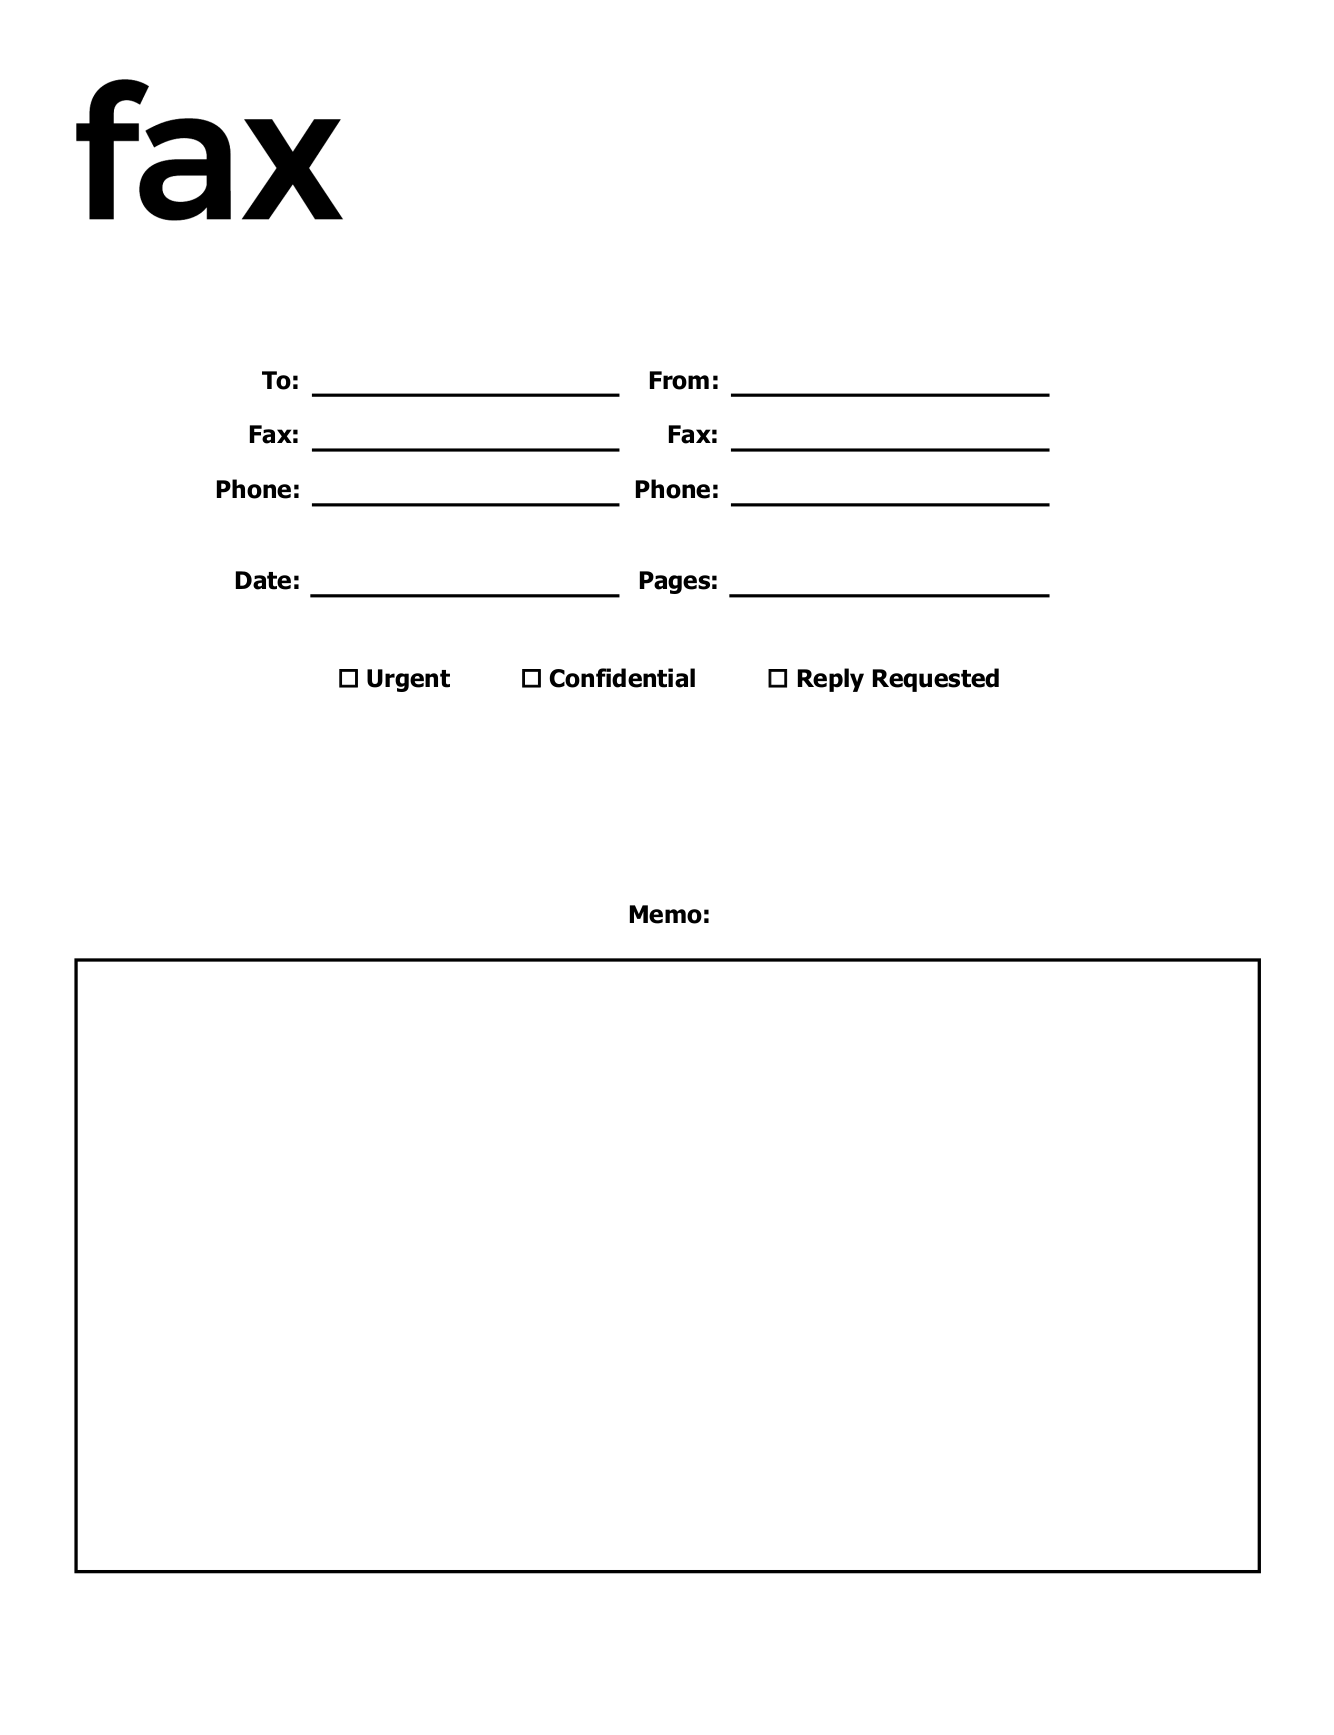 Free Fax Cover Sheets Cost effective and Easy to Use Call Cowboy